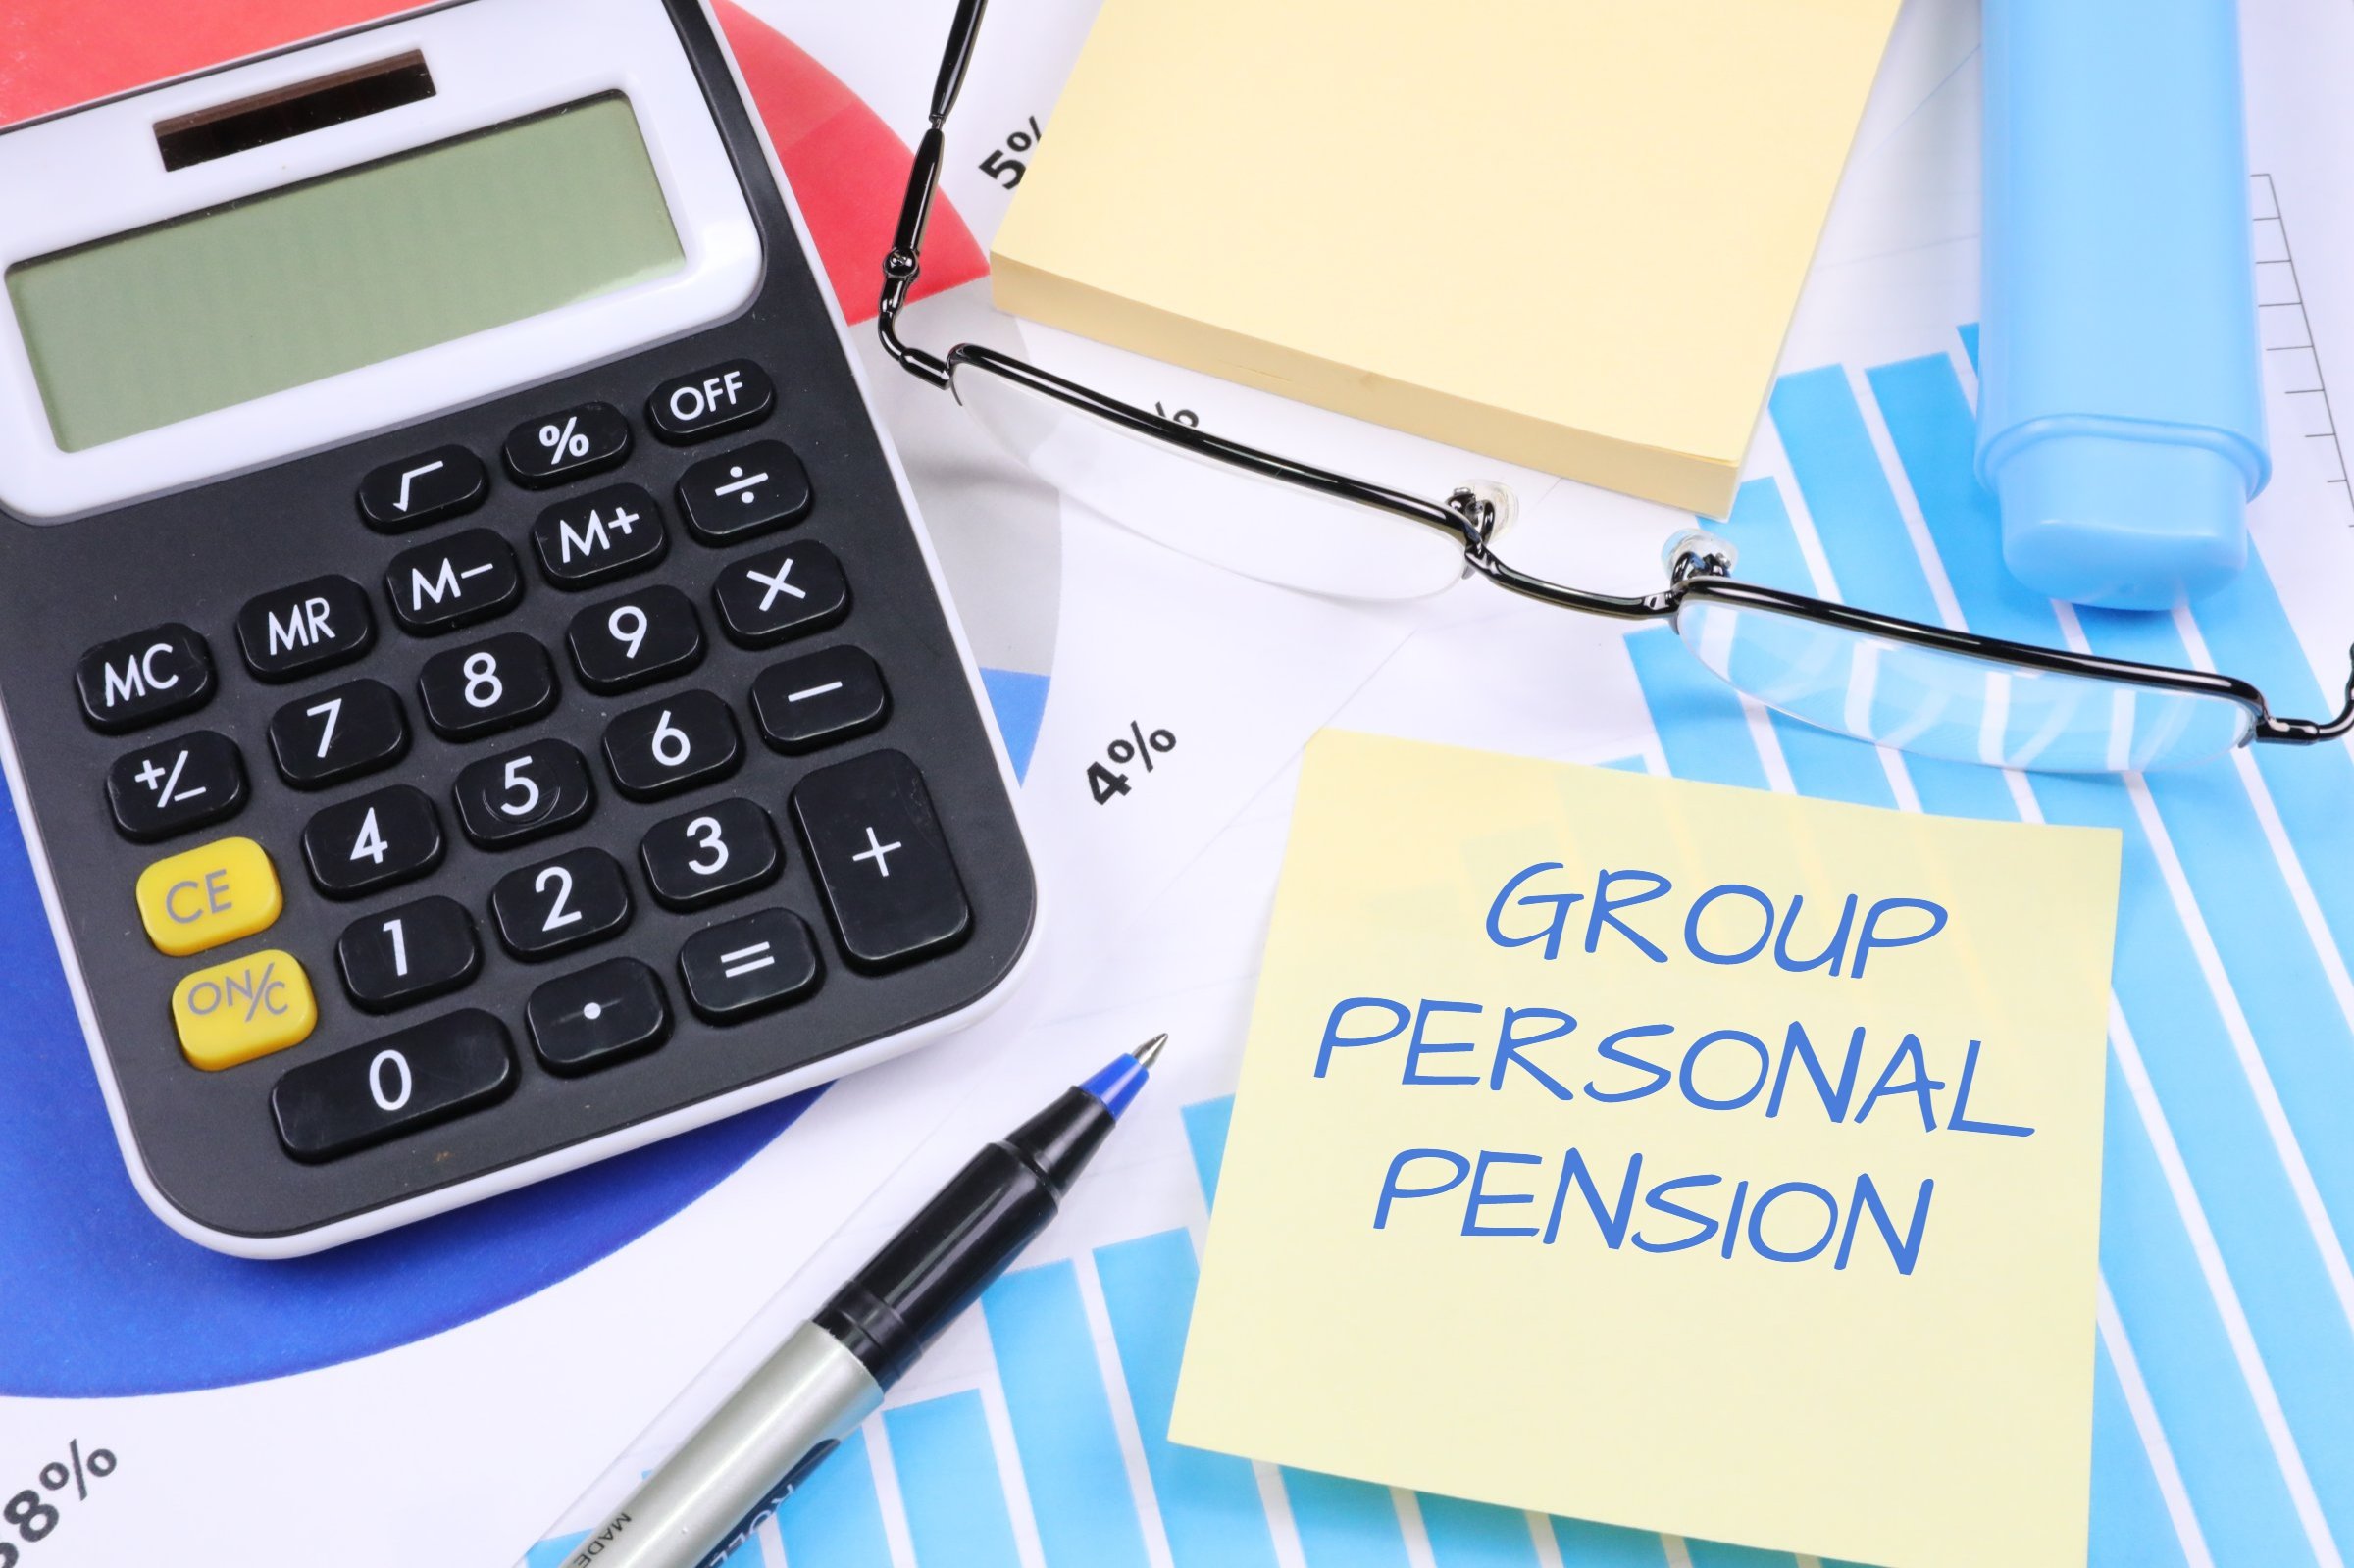 Group Personal Pension